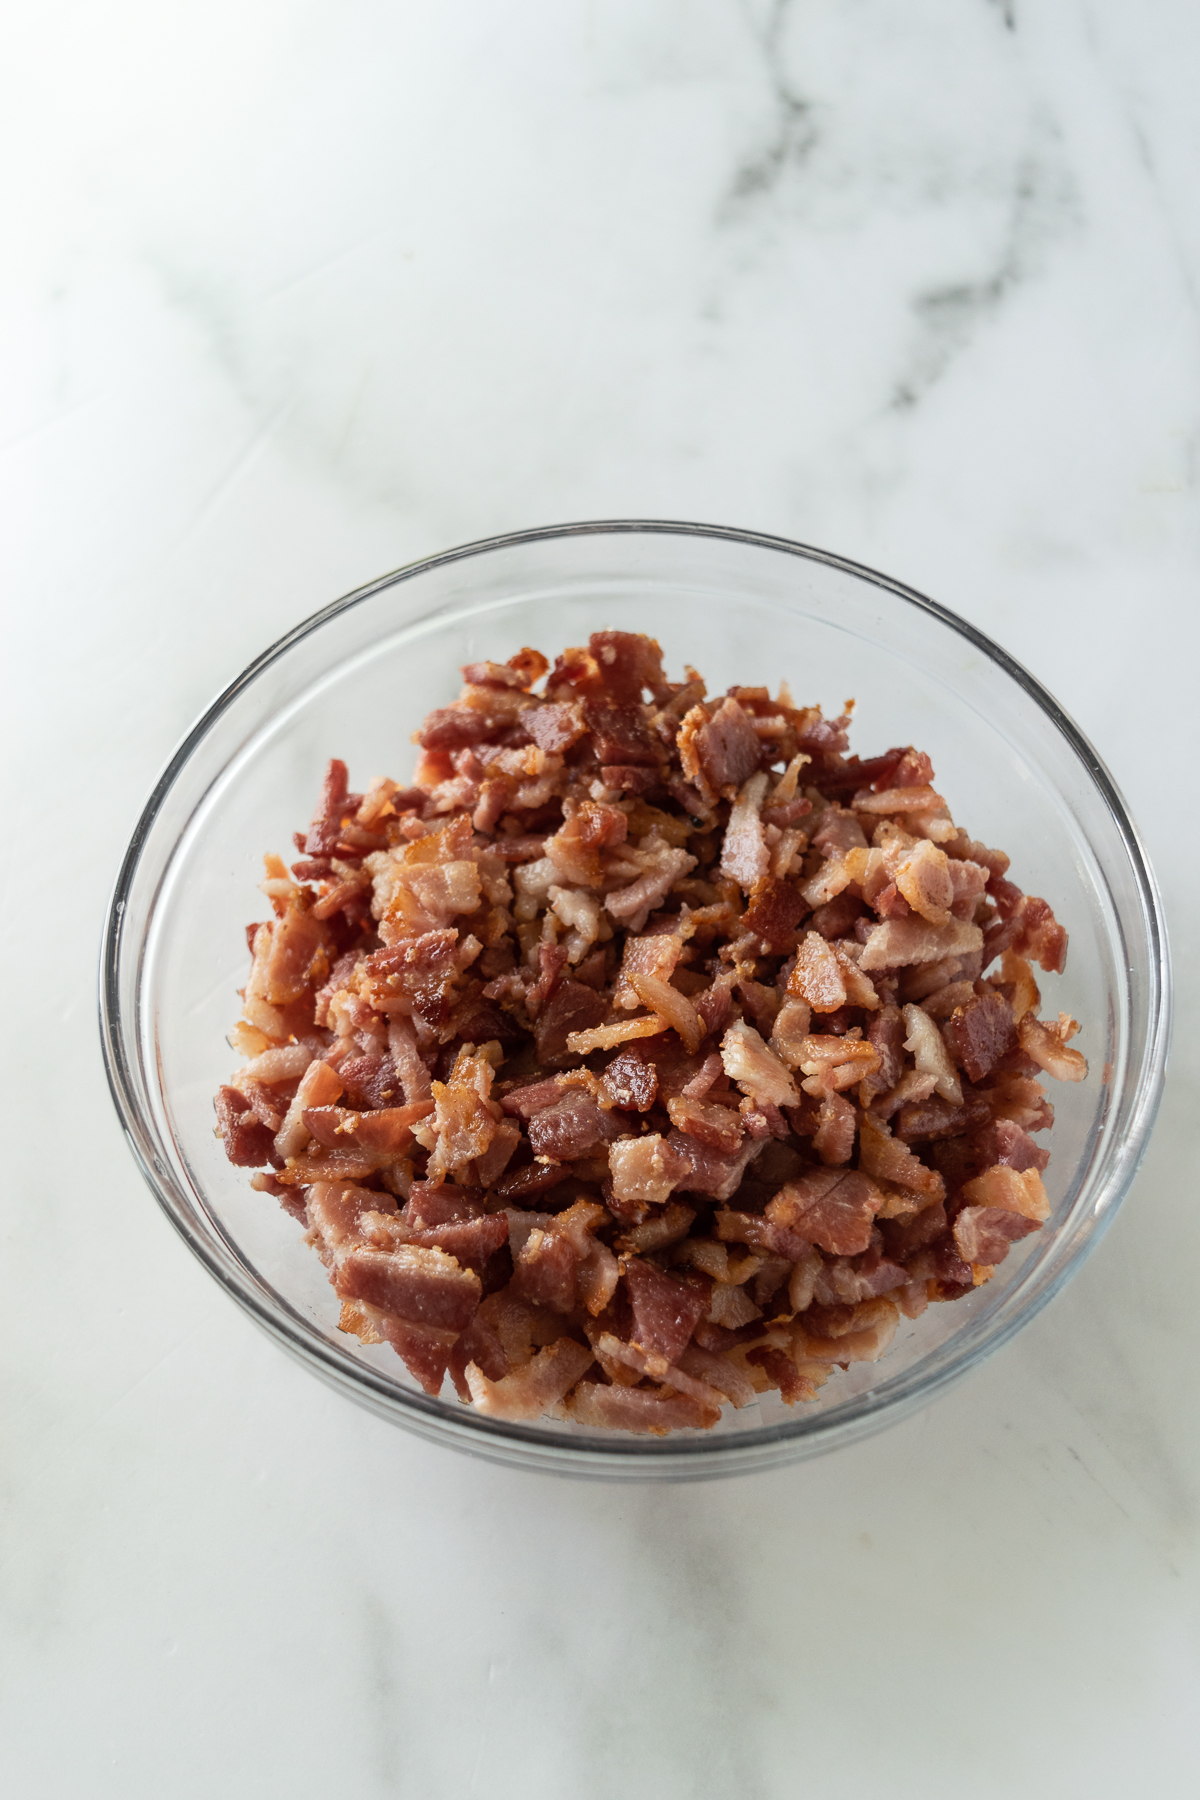 chopped bacon in a clear bowl on a white table.